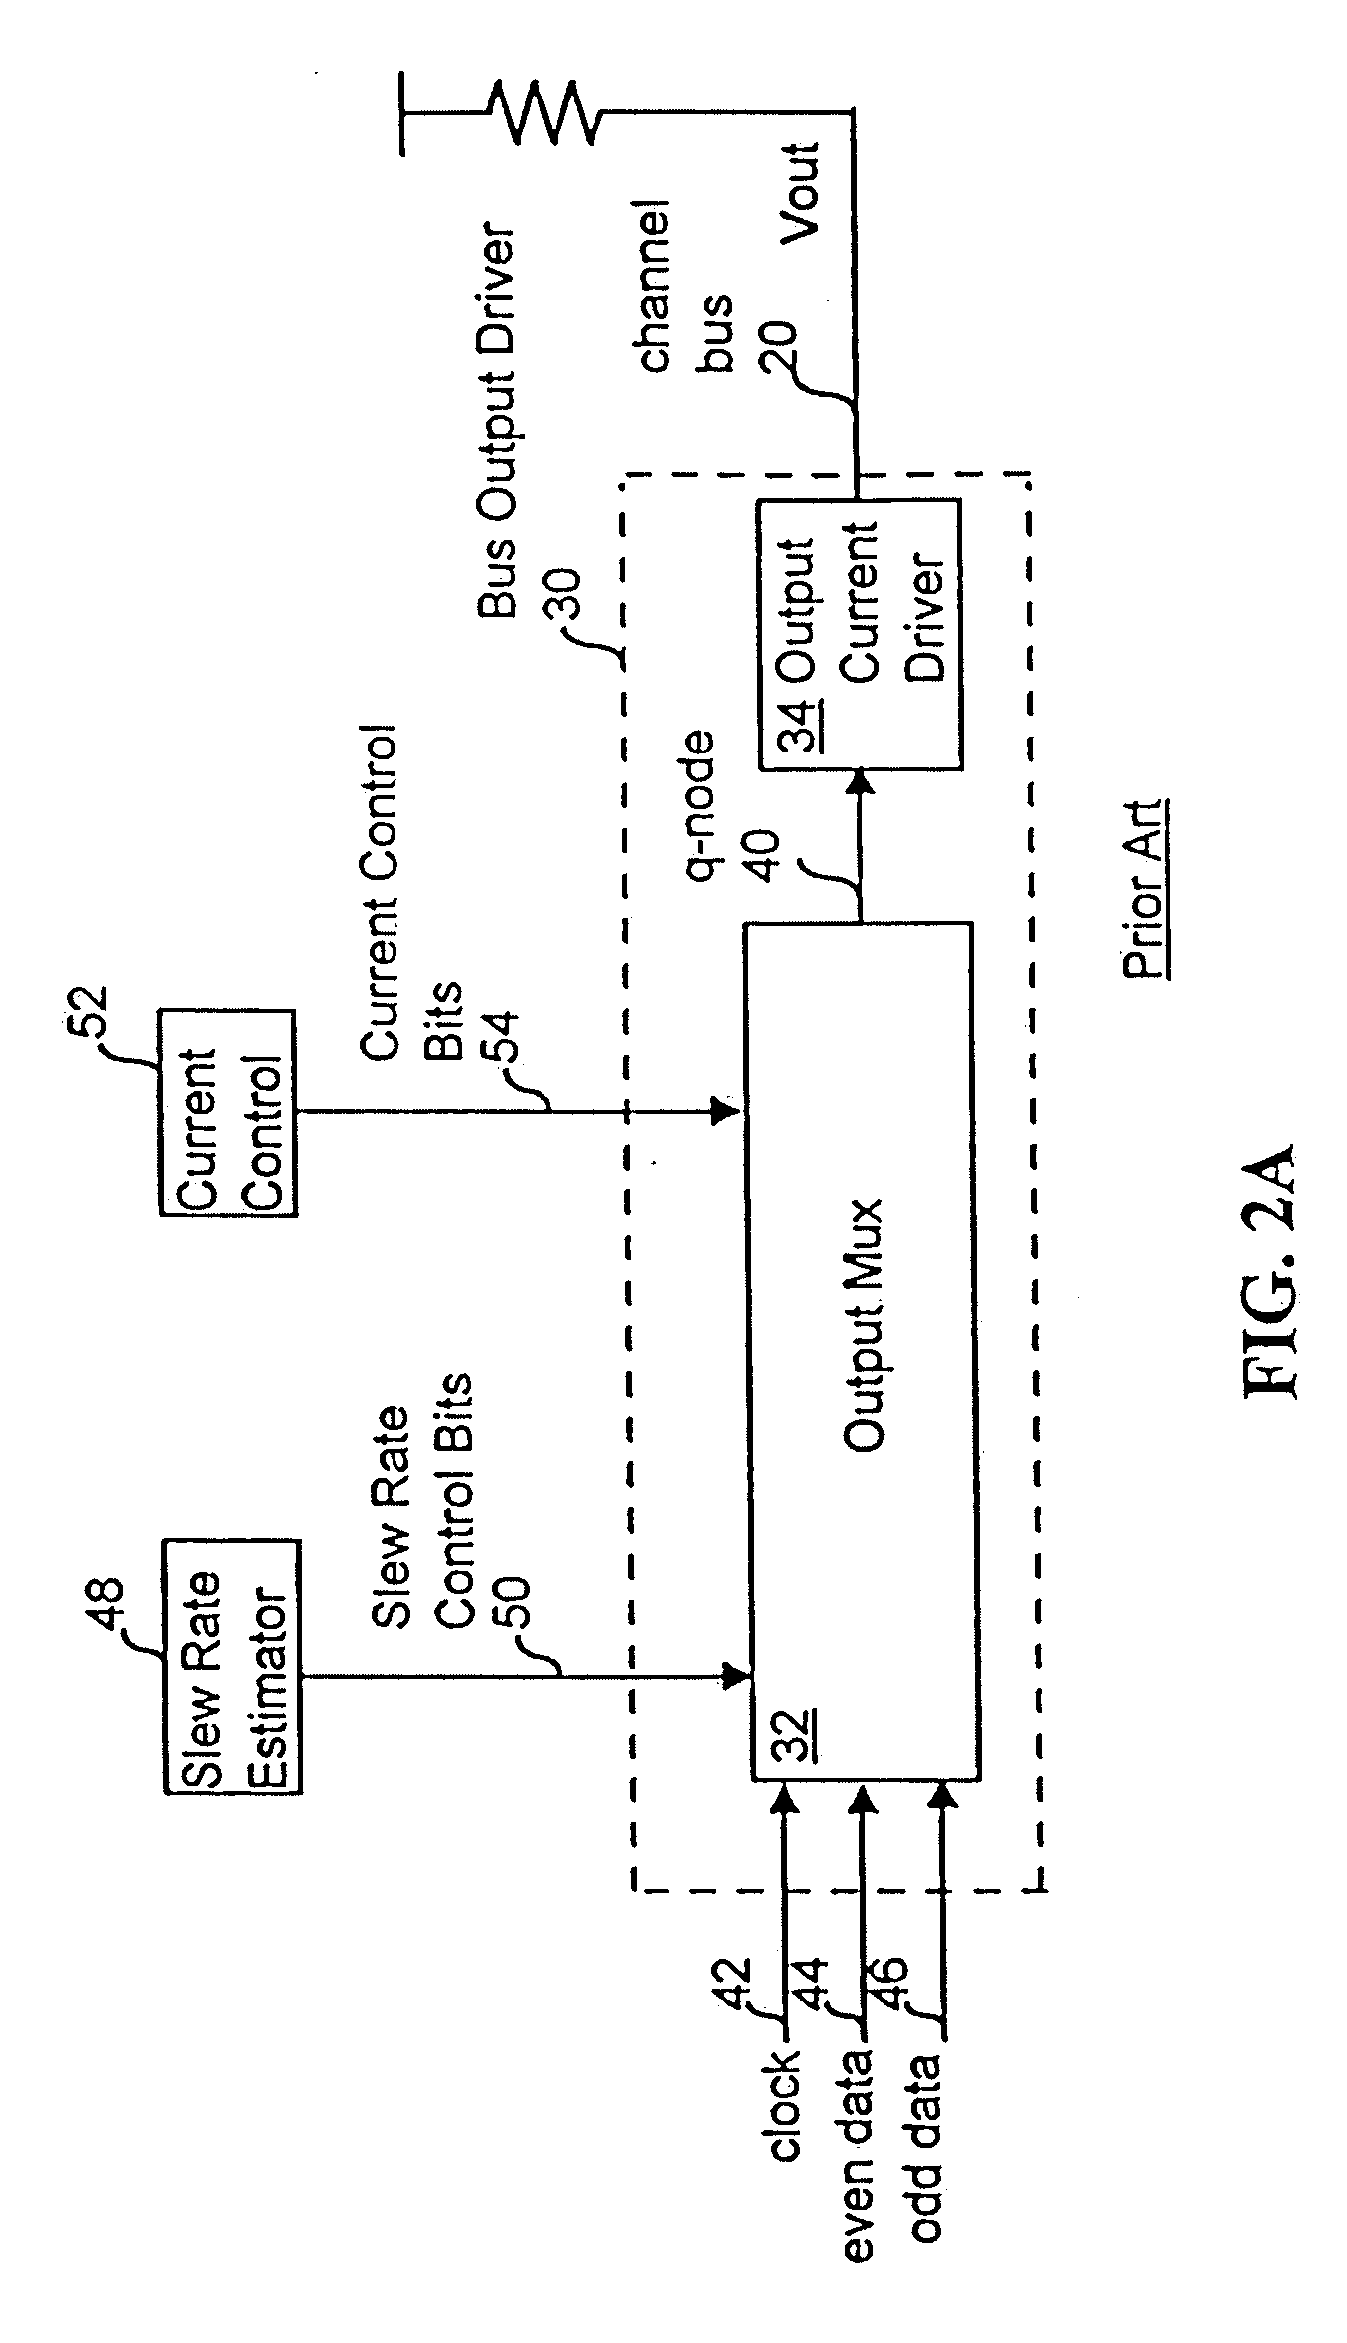 Impedance controlled output driver